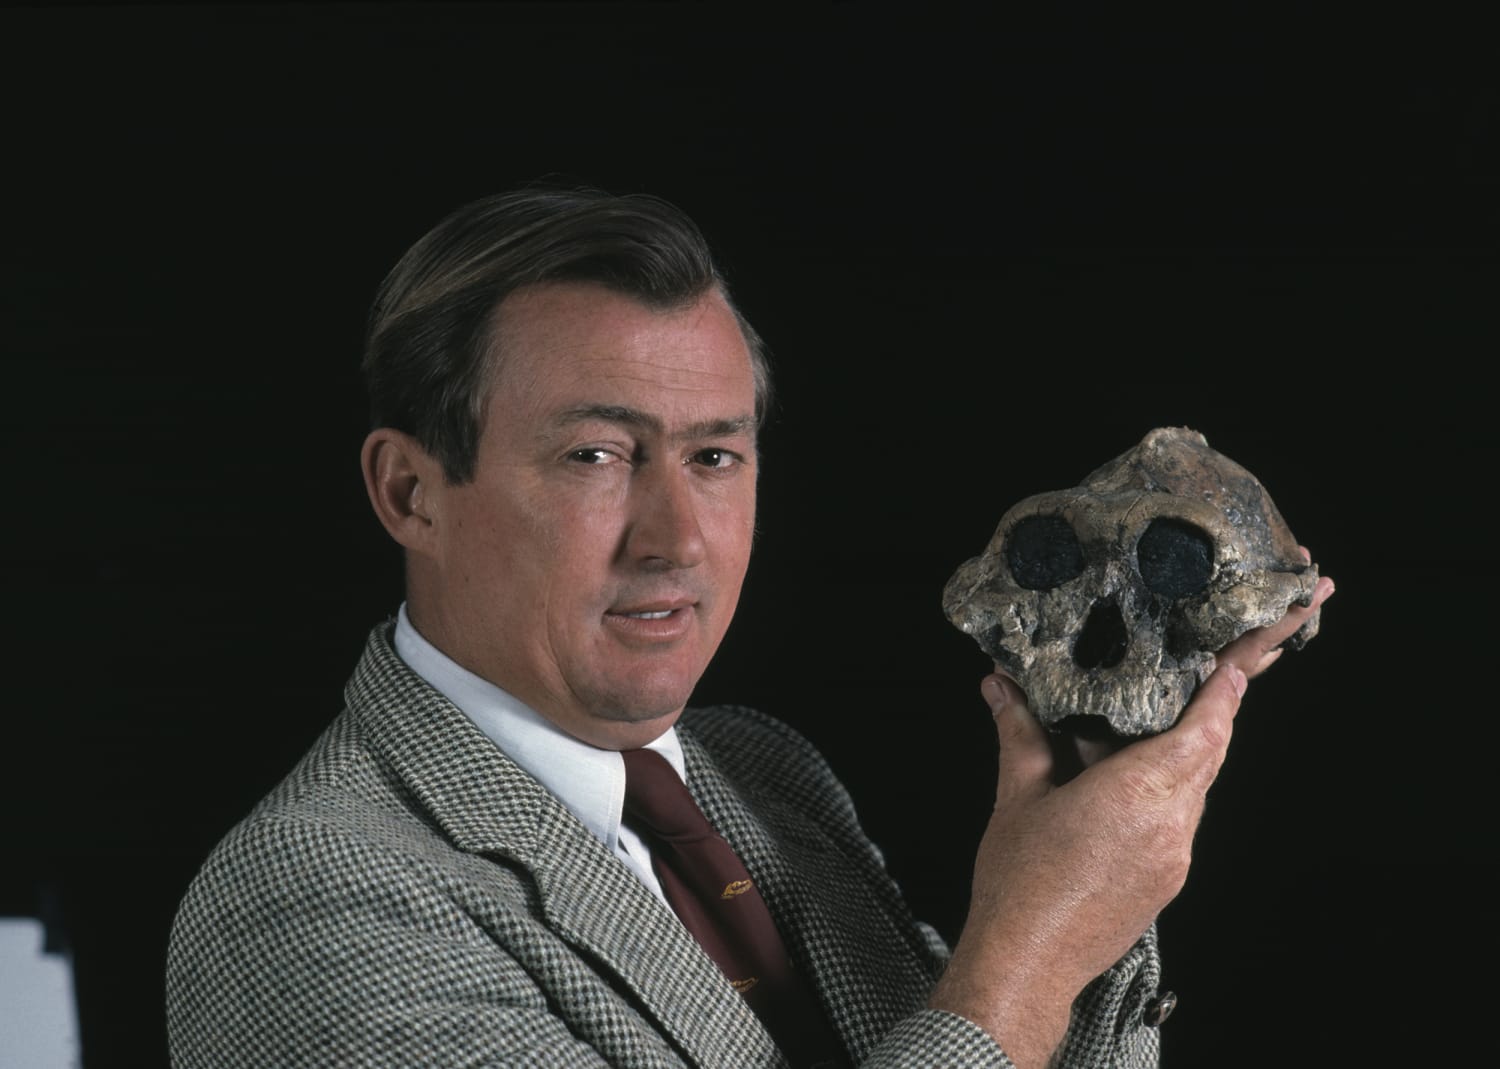 Richard Leakey, Kenyan conservationist who campaigned against ivory trade, has died